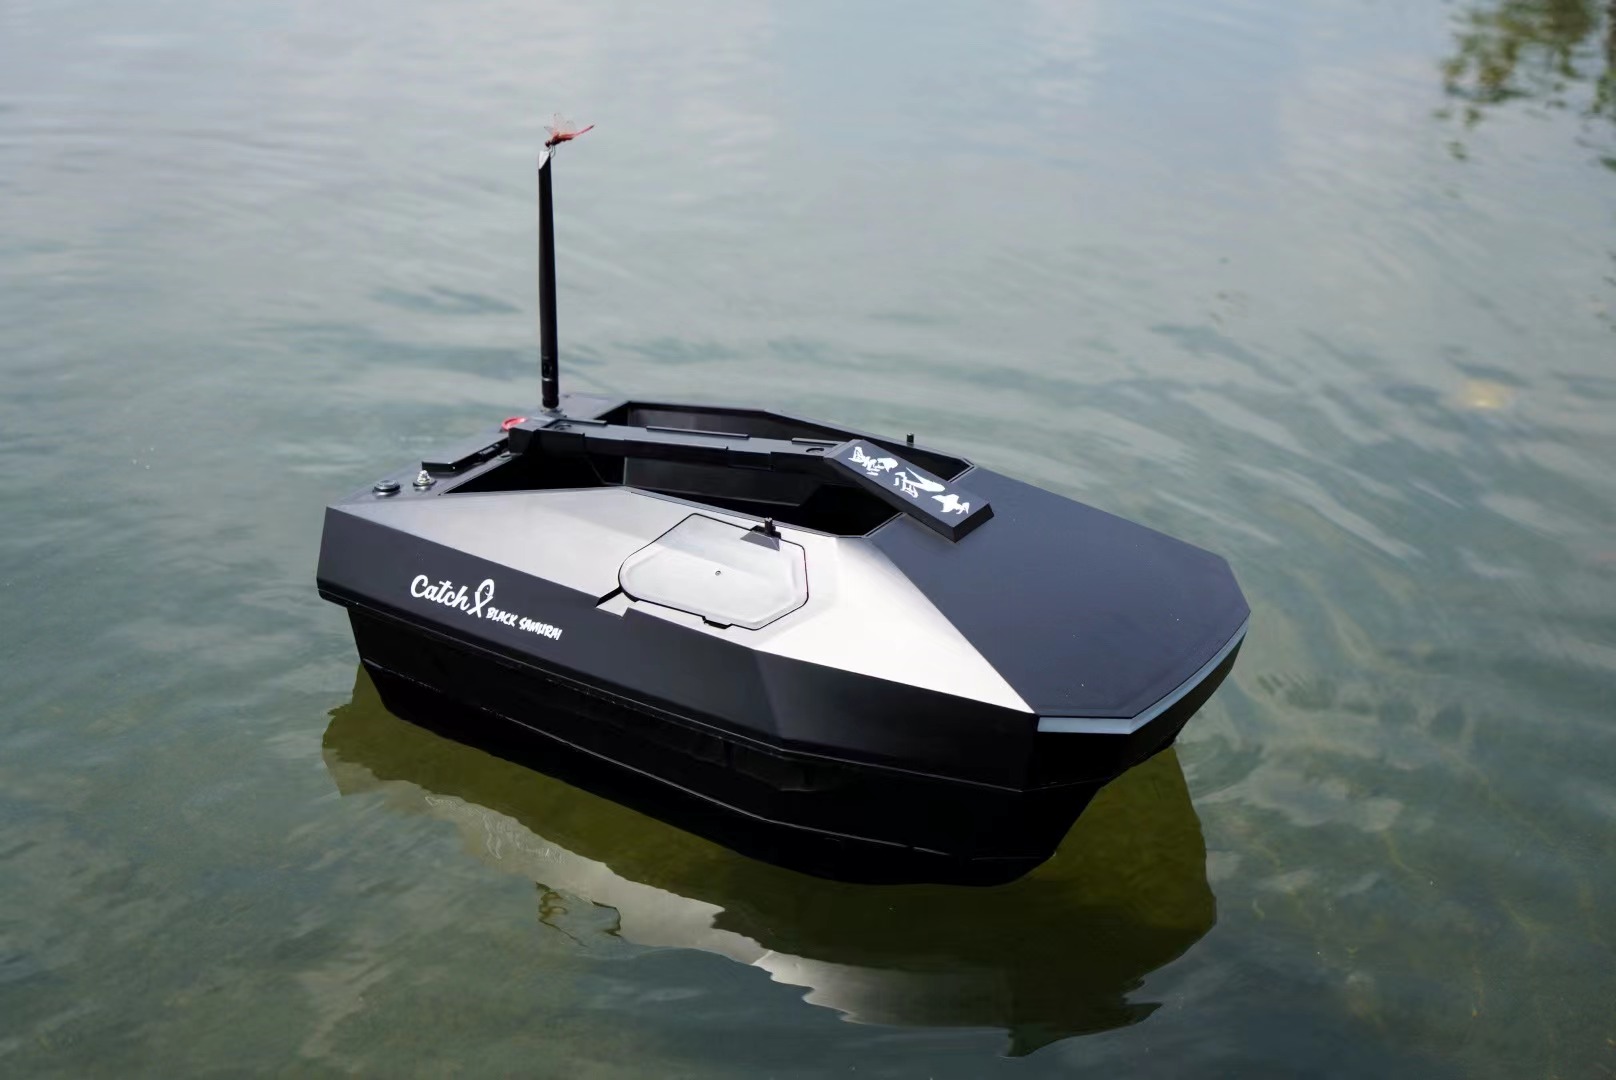 Fishing With a Rippton Bait Boat with GPS Autopilot